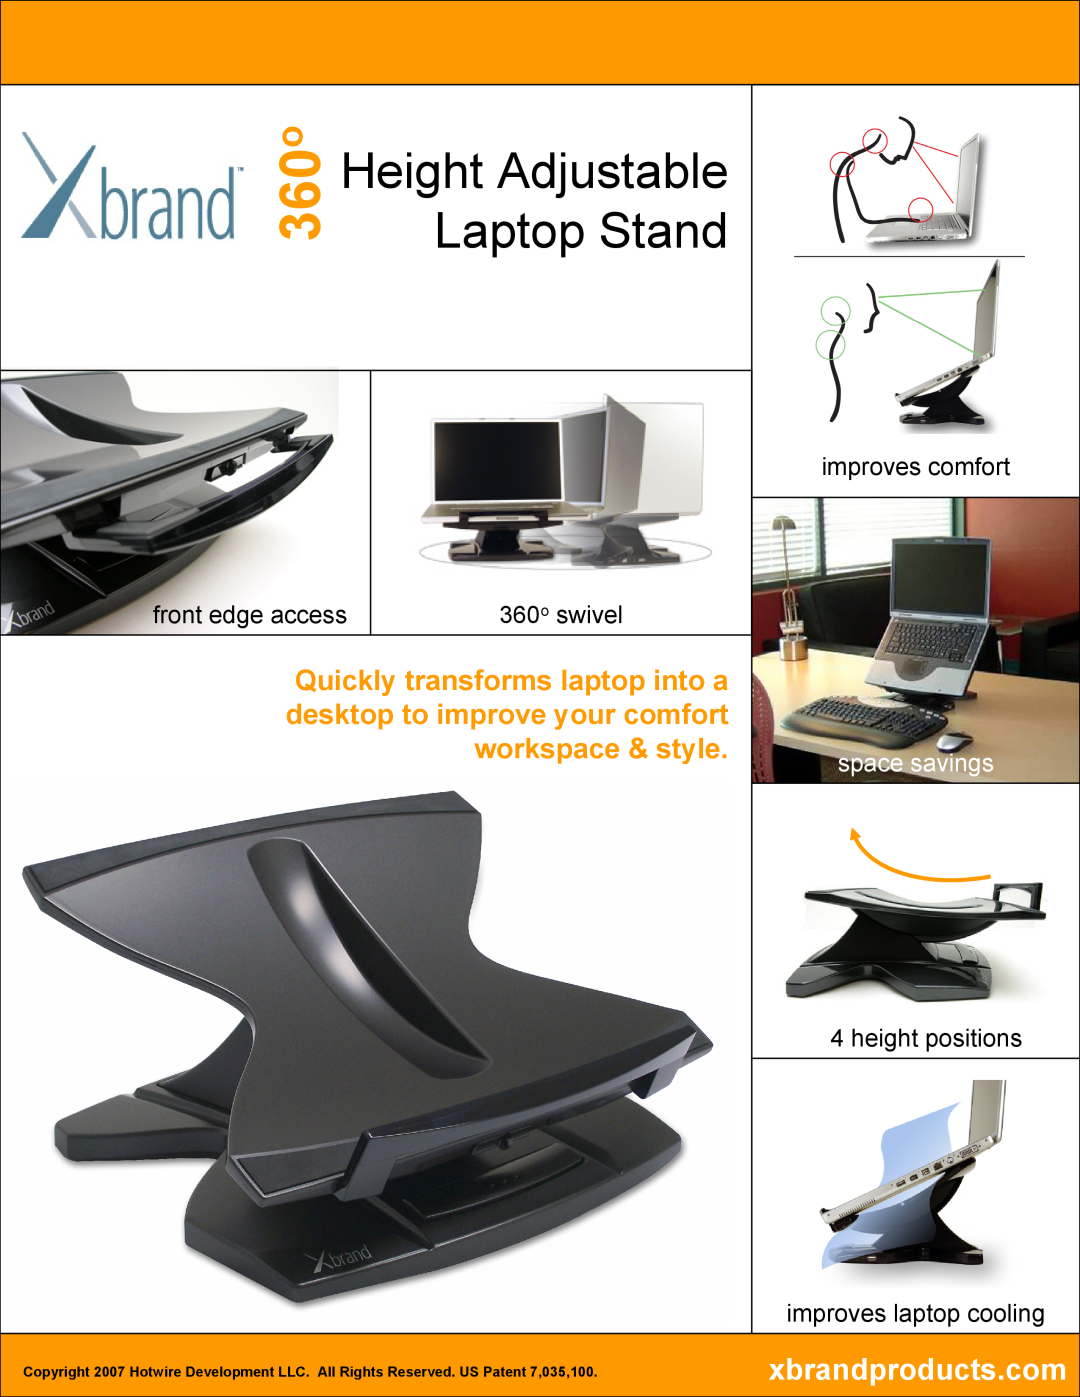 Xbrand 360o Swivel manual front edge access, 360o swivel, height positions, Height Adjustable, Laptop Stand, space savings 